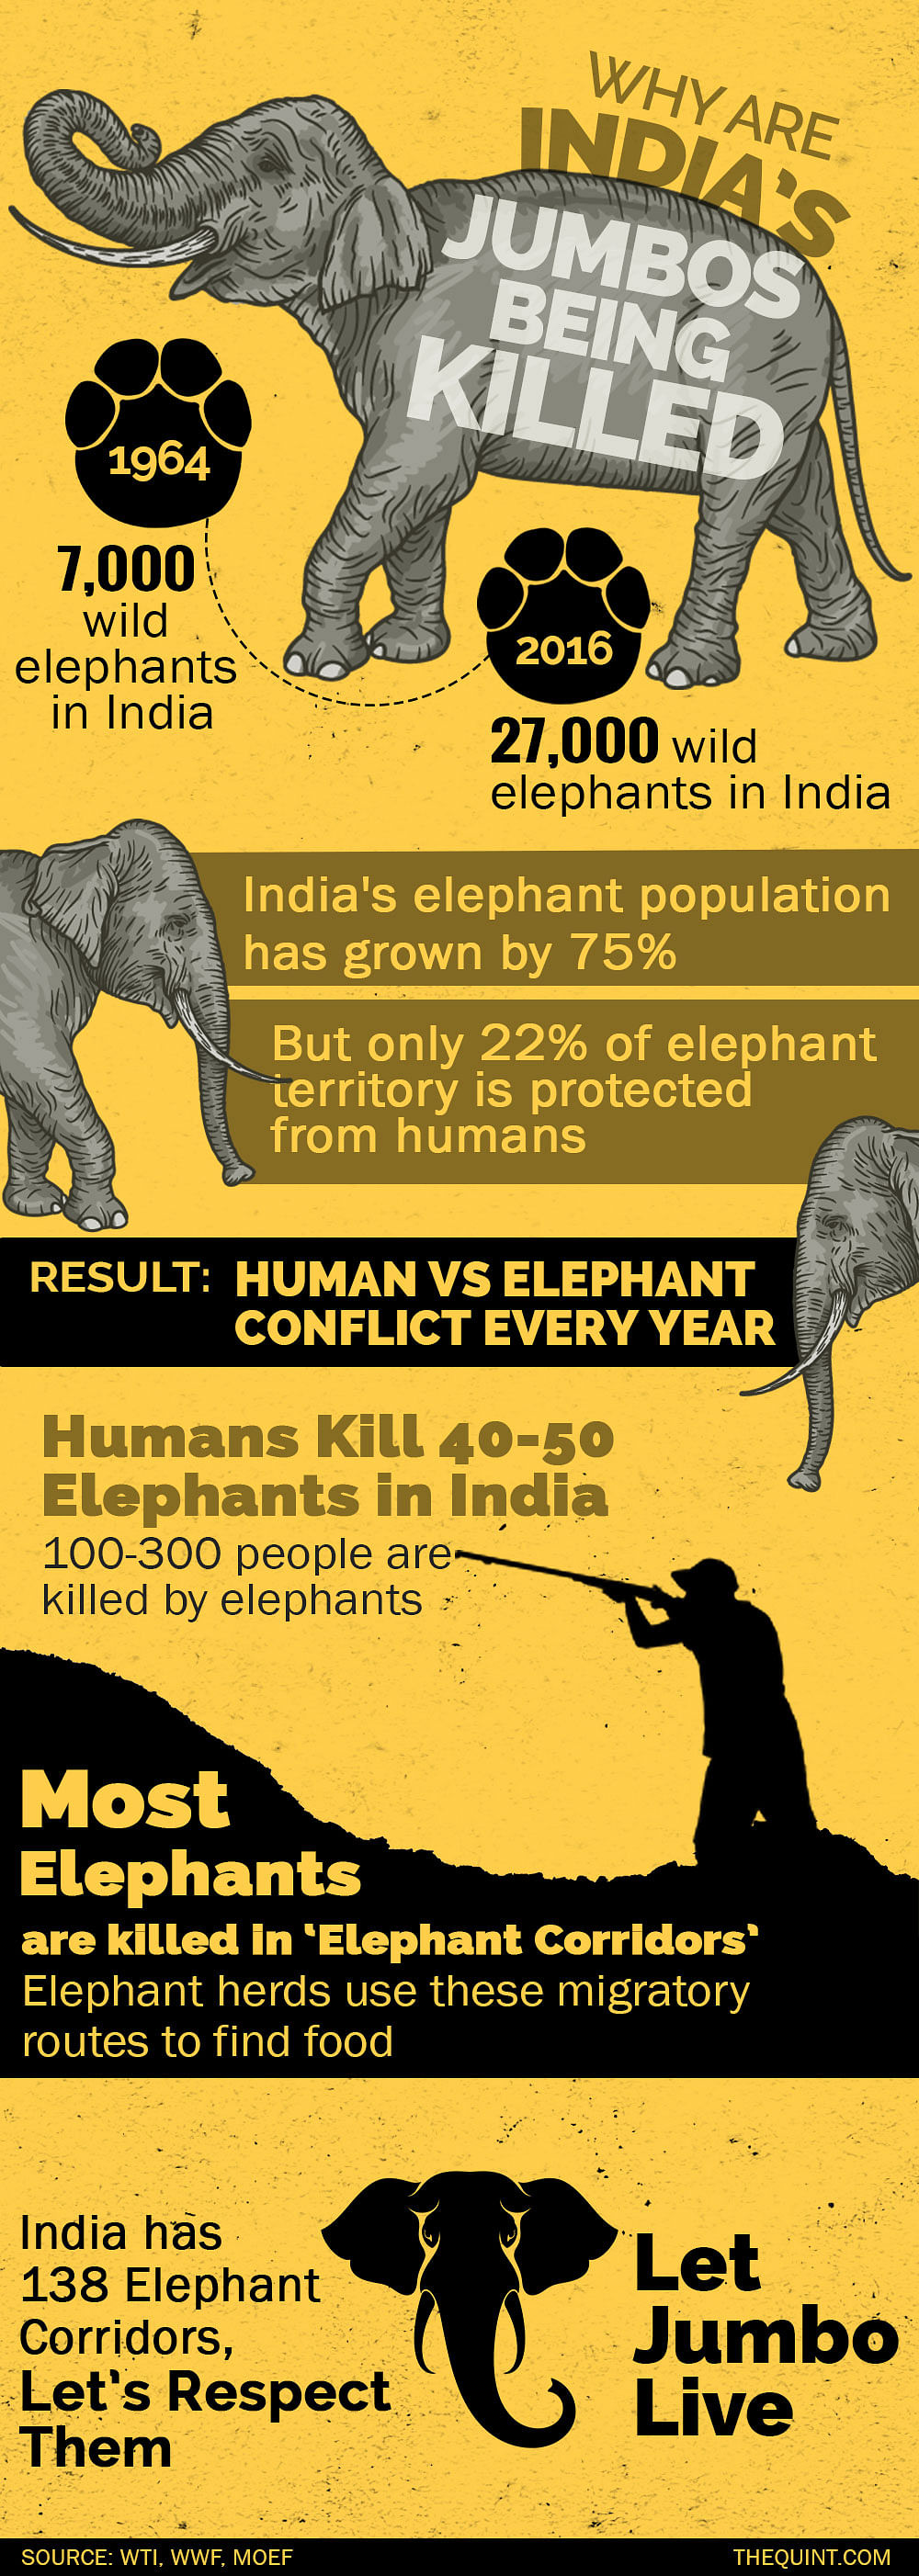 For World Elephant Day, we look at the relationship between wild elephants and people in their paths. 